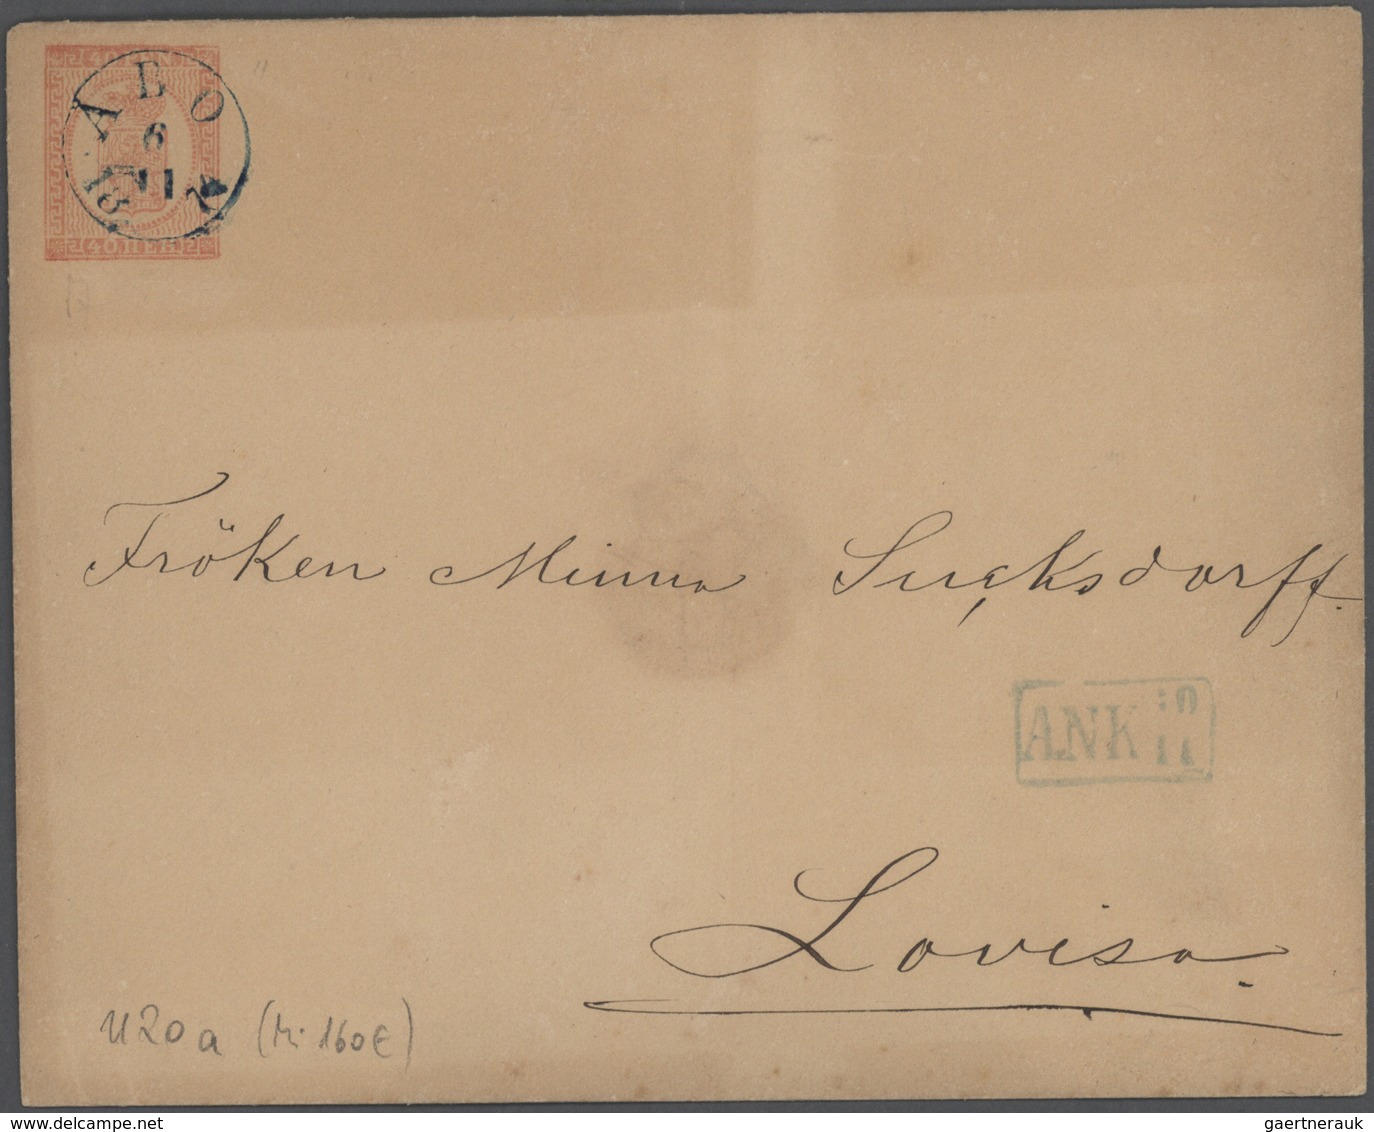 Finnland - Ganzsachen: 1874/1940, lot of ca. 50 used postal stationery postcards and covers with man